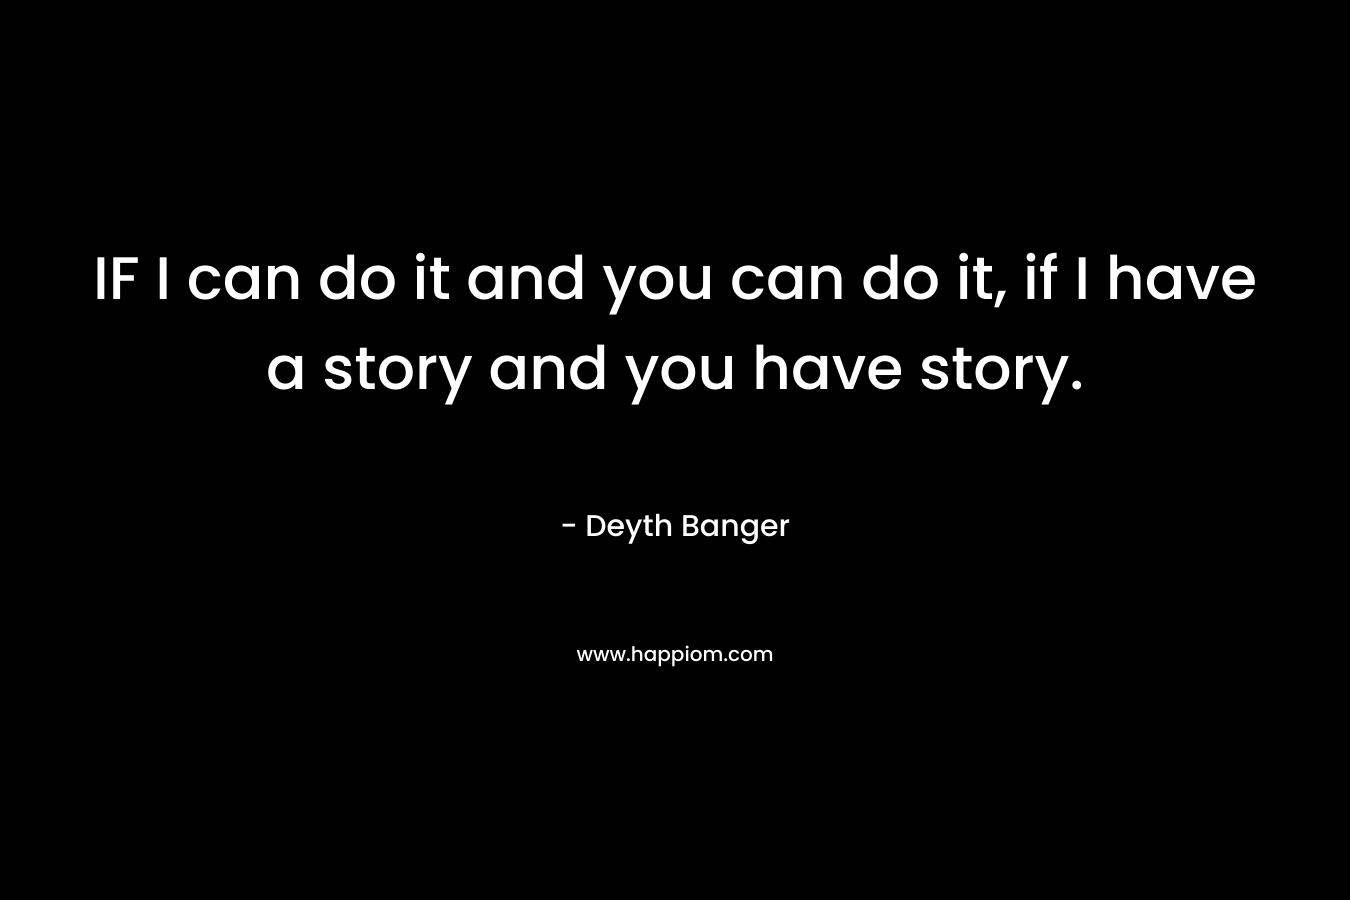 IF I can do it and you can do it, if I have a story and you have story.